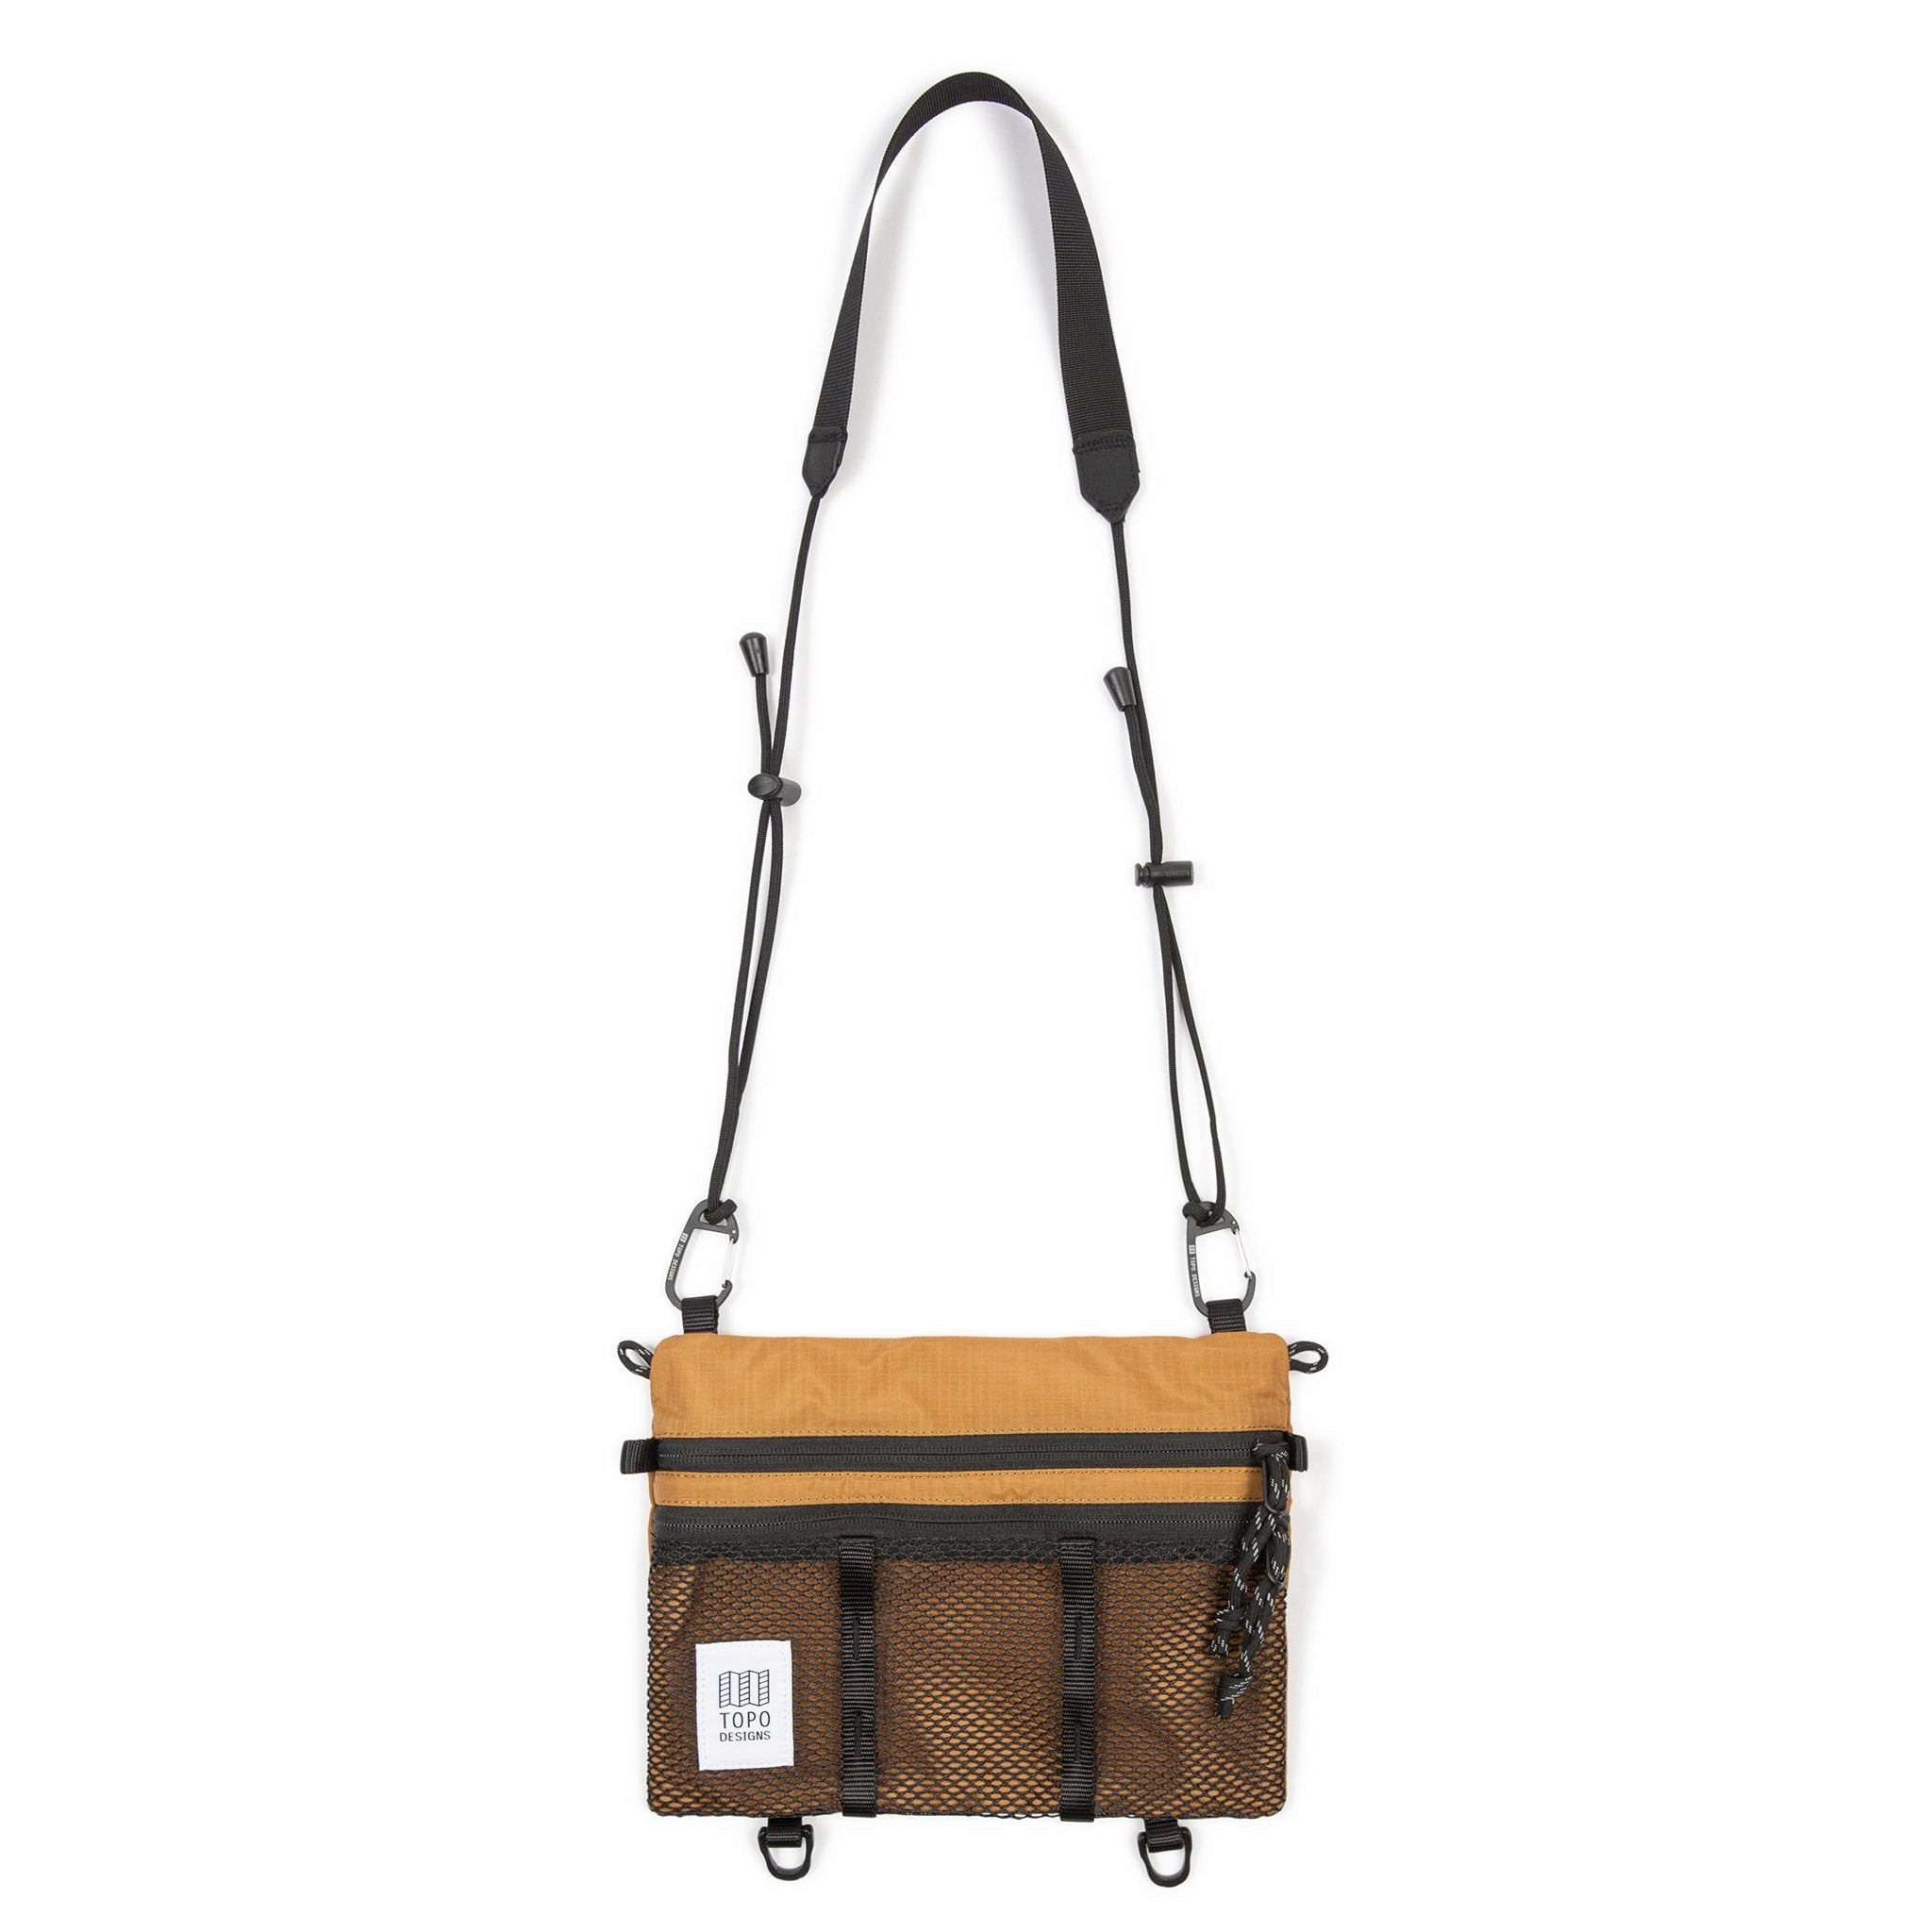 Topo Designs Mountain Accessory crossbody Shoulder Bag in "Khaki" brown lightweight recycled nylon.